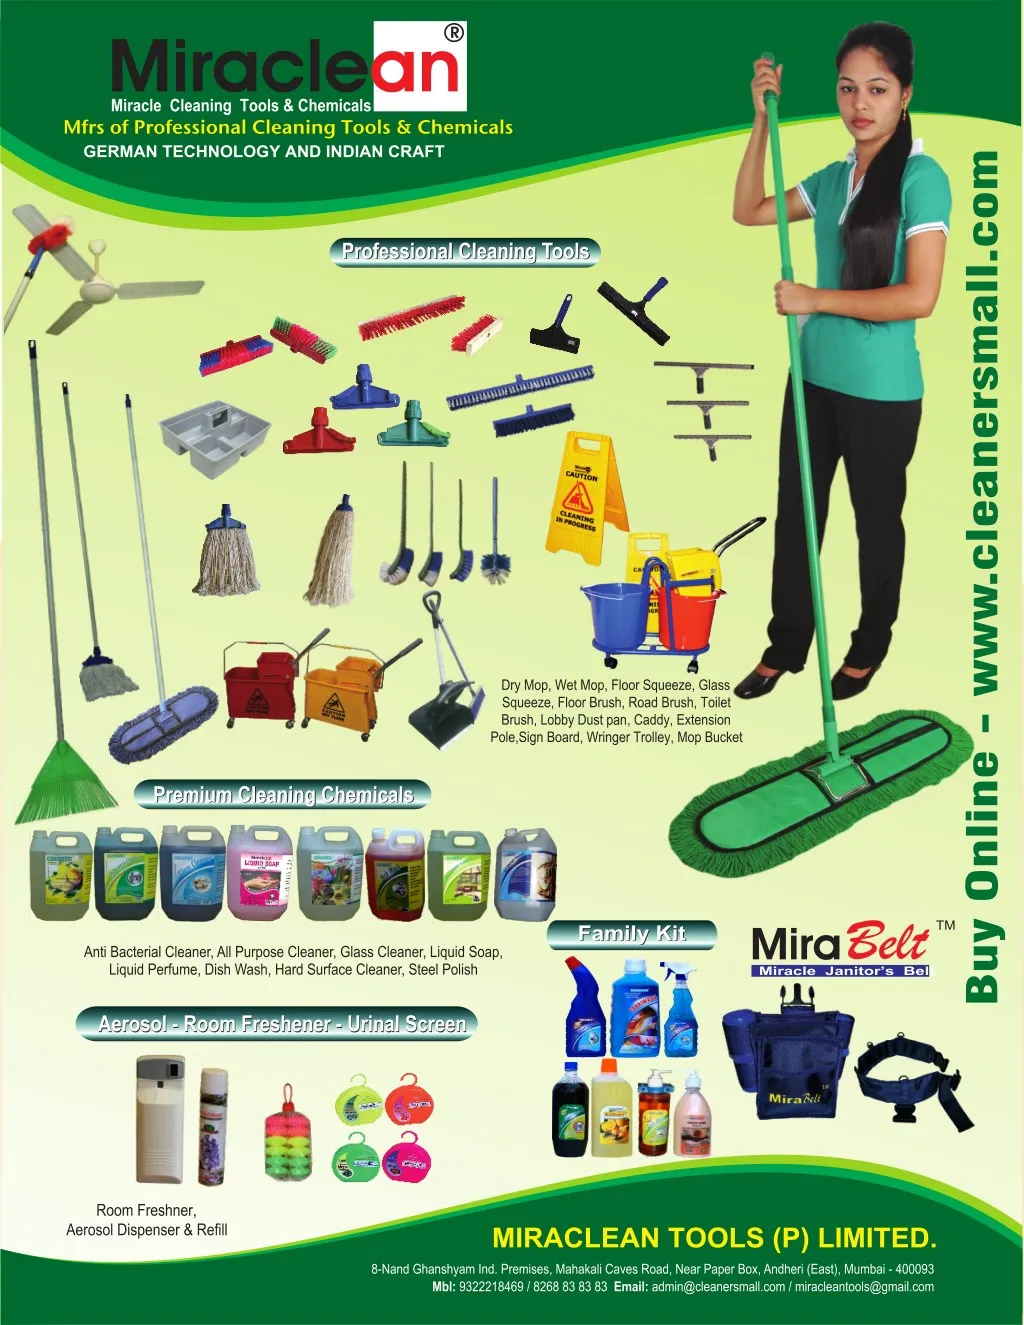 PPT - Office Cleaning Supplies, Cleaning Tools and Equipment -   PowerPoint Presentation - ID:7600357